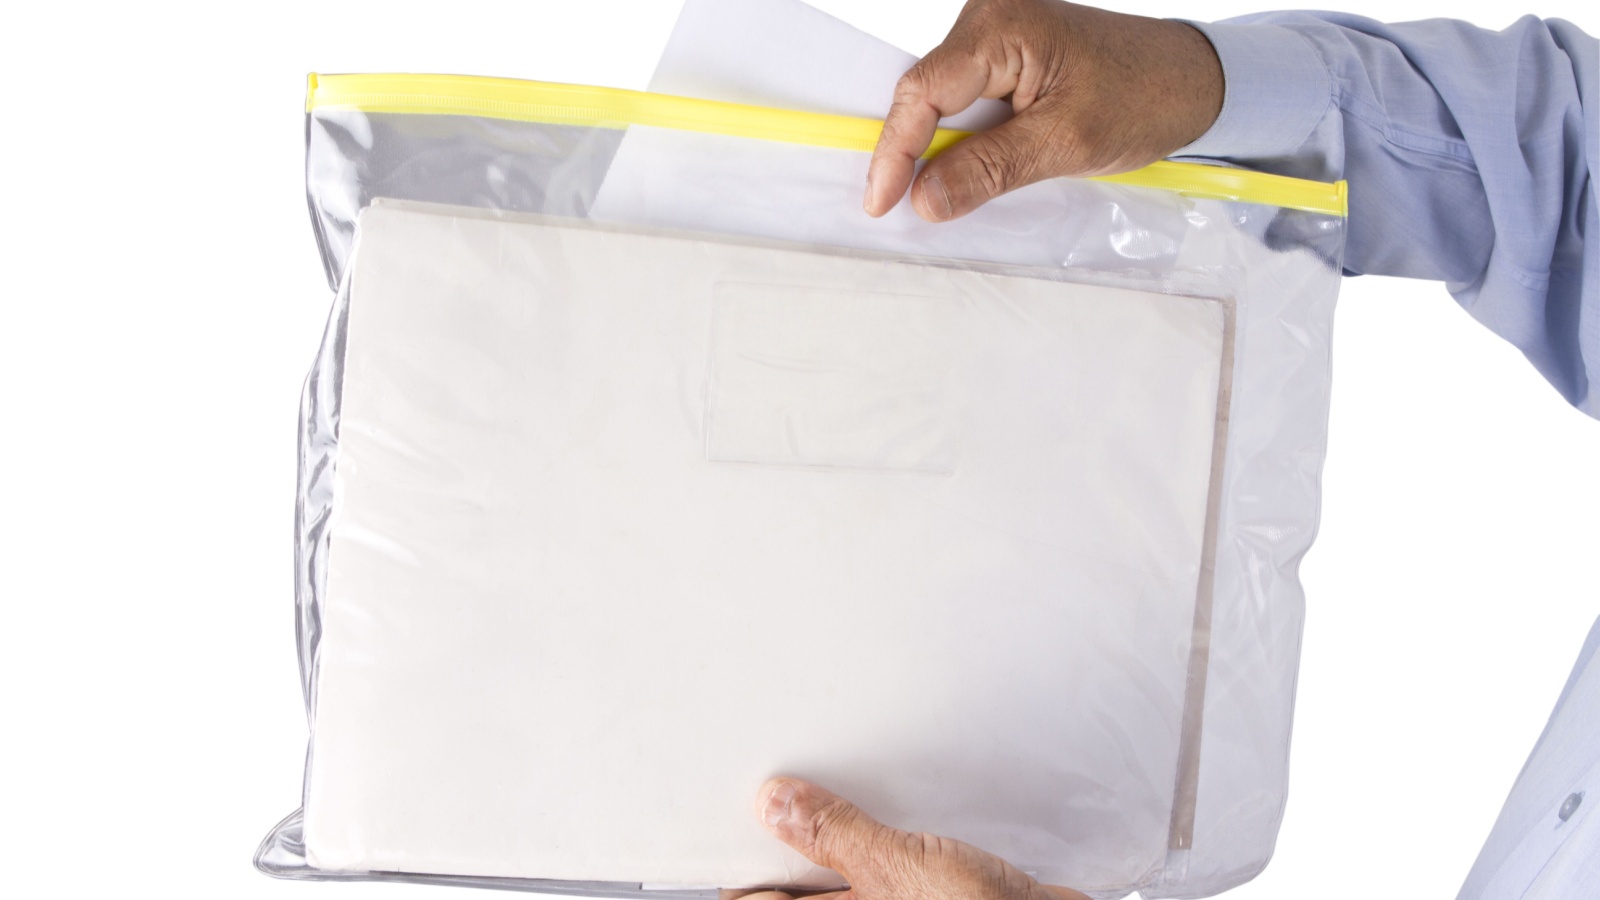 Stacking or keeping documents safely and neatly in a Transparent Plastic Zipper Bag or plastic sachet